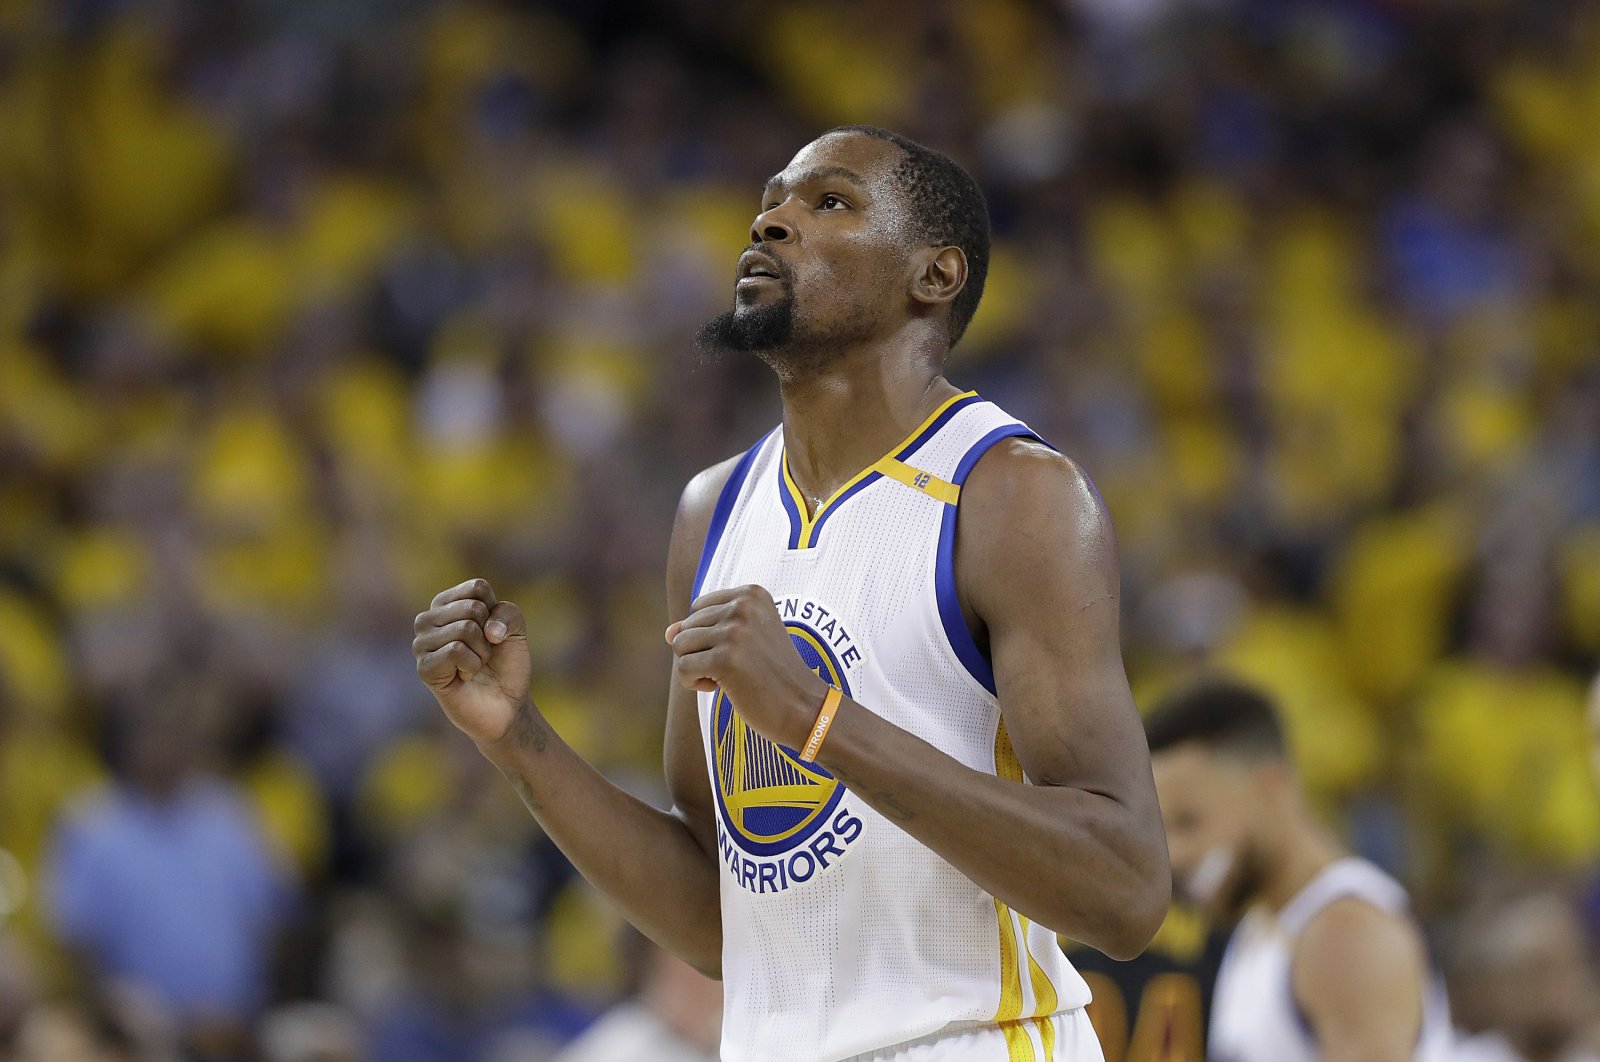 Kevin Durant will face Derrick Jones in the first game of the virtual tournament. (AP Photo)